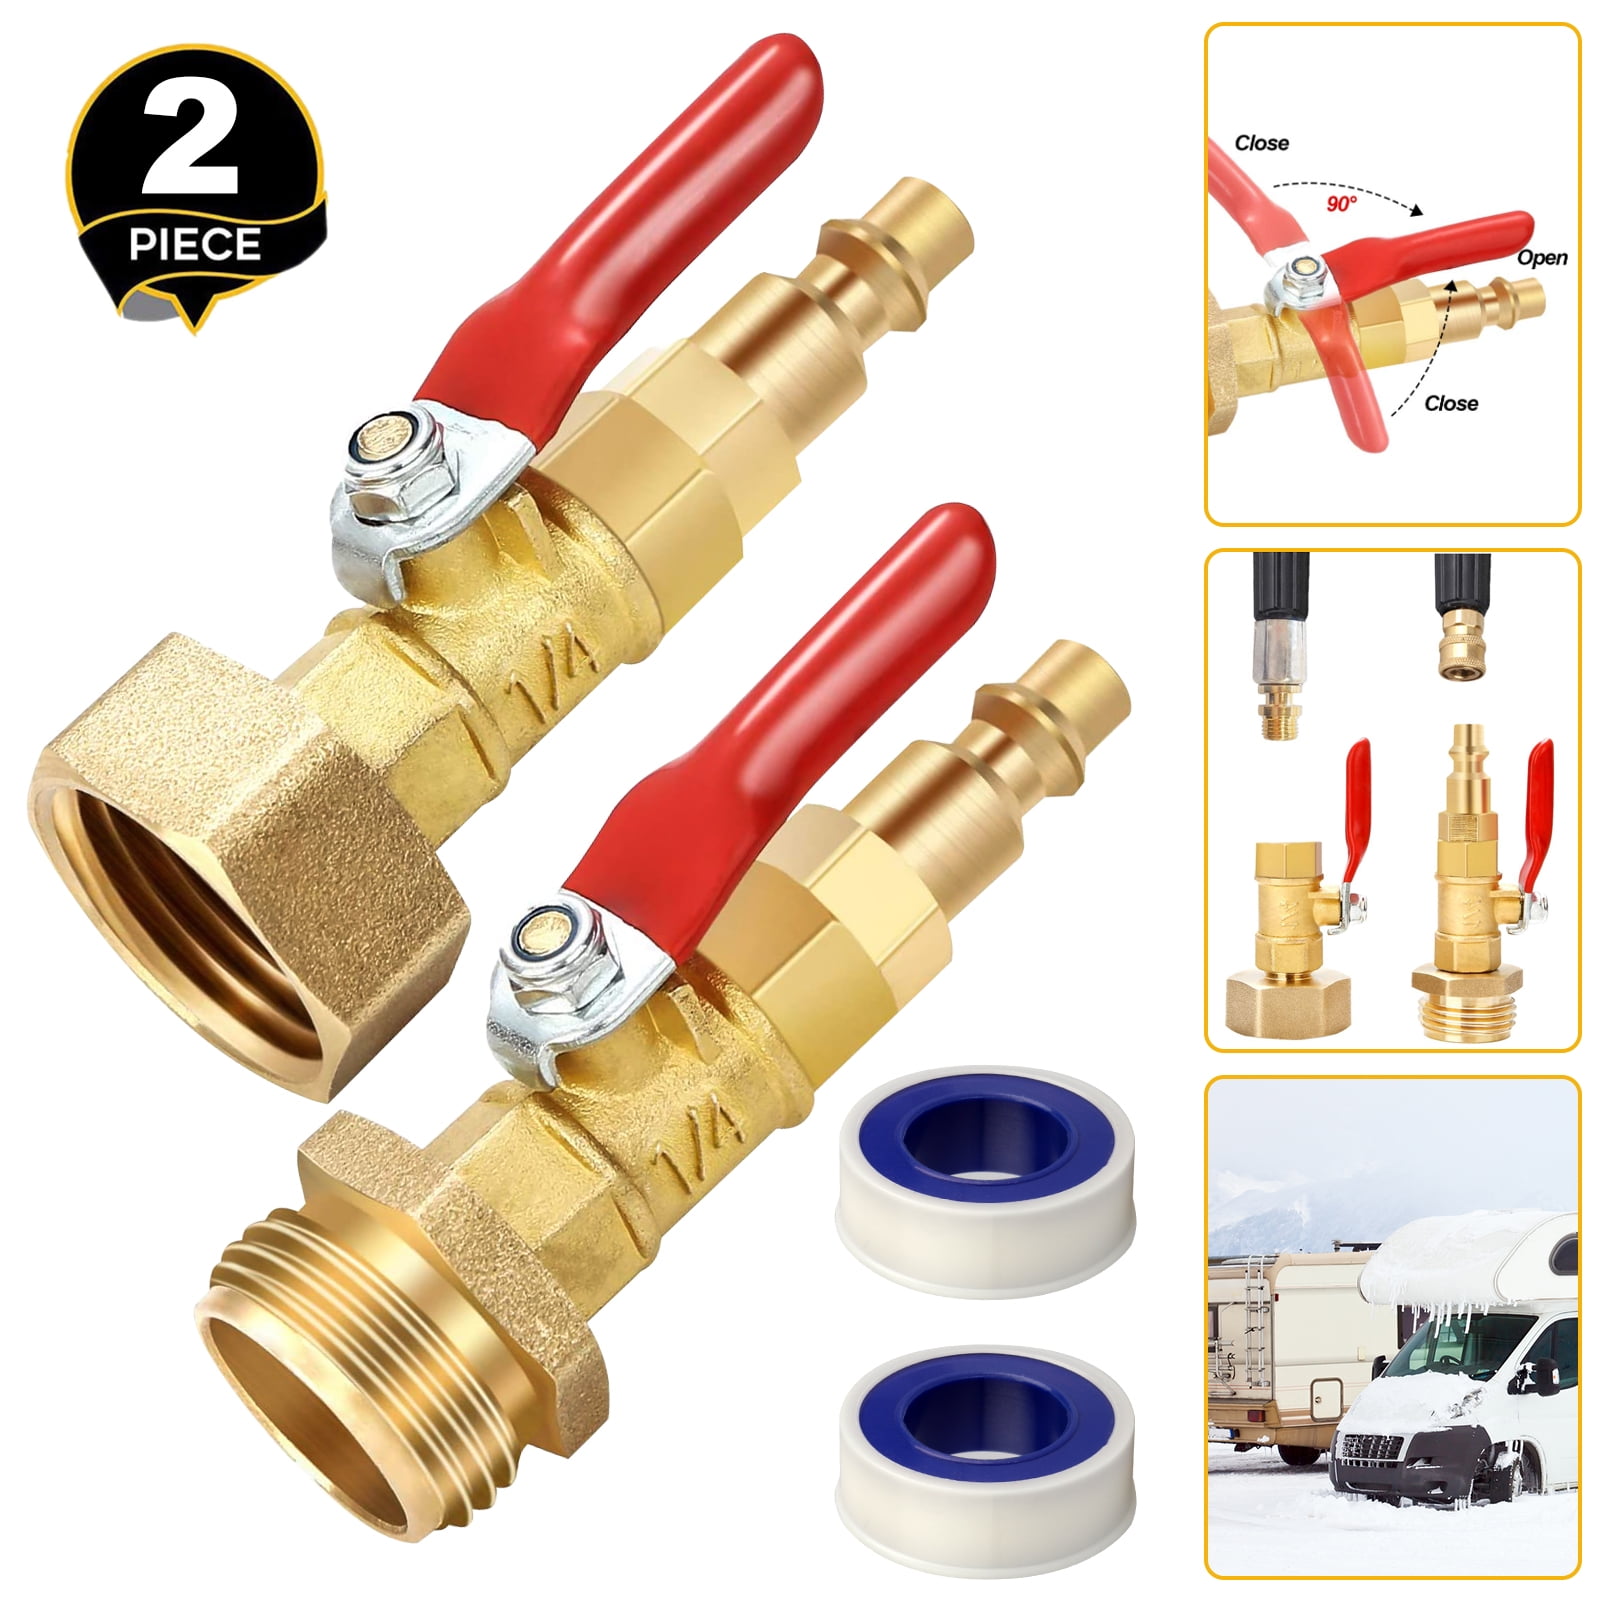 Brass Winterizing Quick Blowout Adapter with Ball Valve Pack of 2 QWORK Winterize Adapter with 1/4 Inch Male Quick Connecting Plug and 3/4 inch Male GHT Thread 